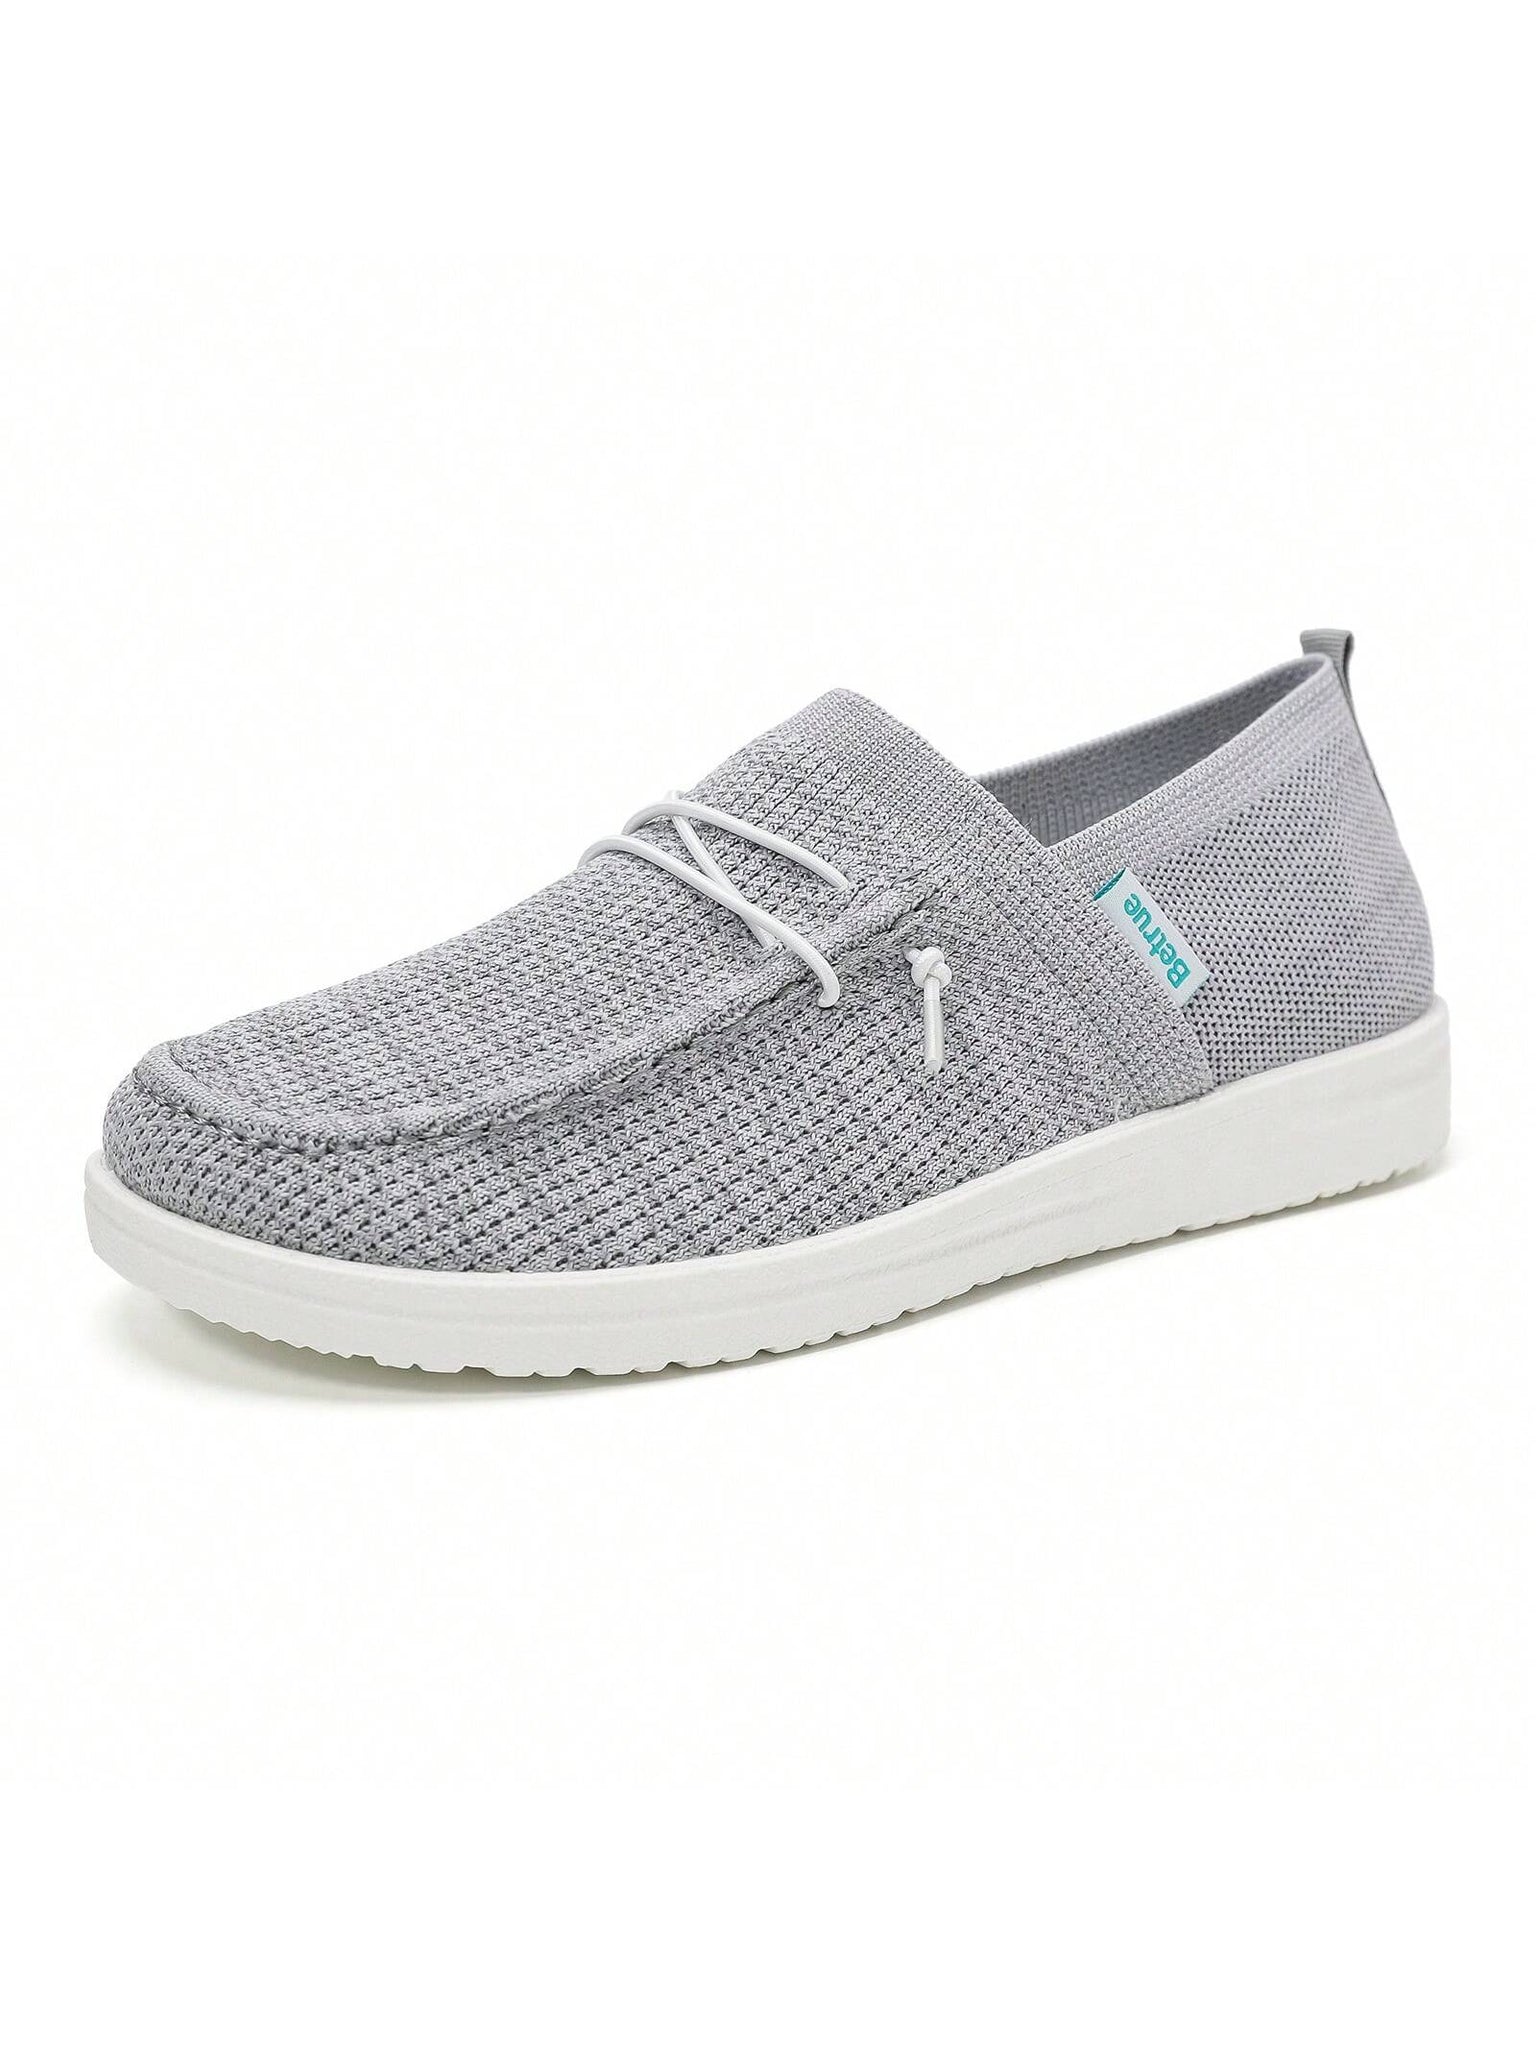 Breathable Slip On Shoes For Women, Womens Casual Boat Loafers Walking Shoes, Lightweight Canvas Lace Up Loafers Shoes For Women-Grey-3